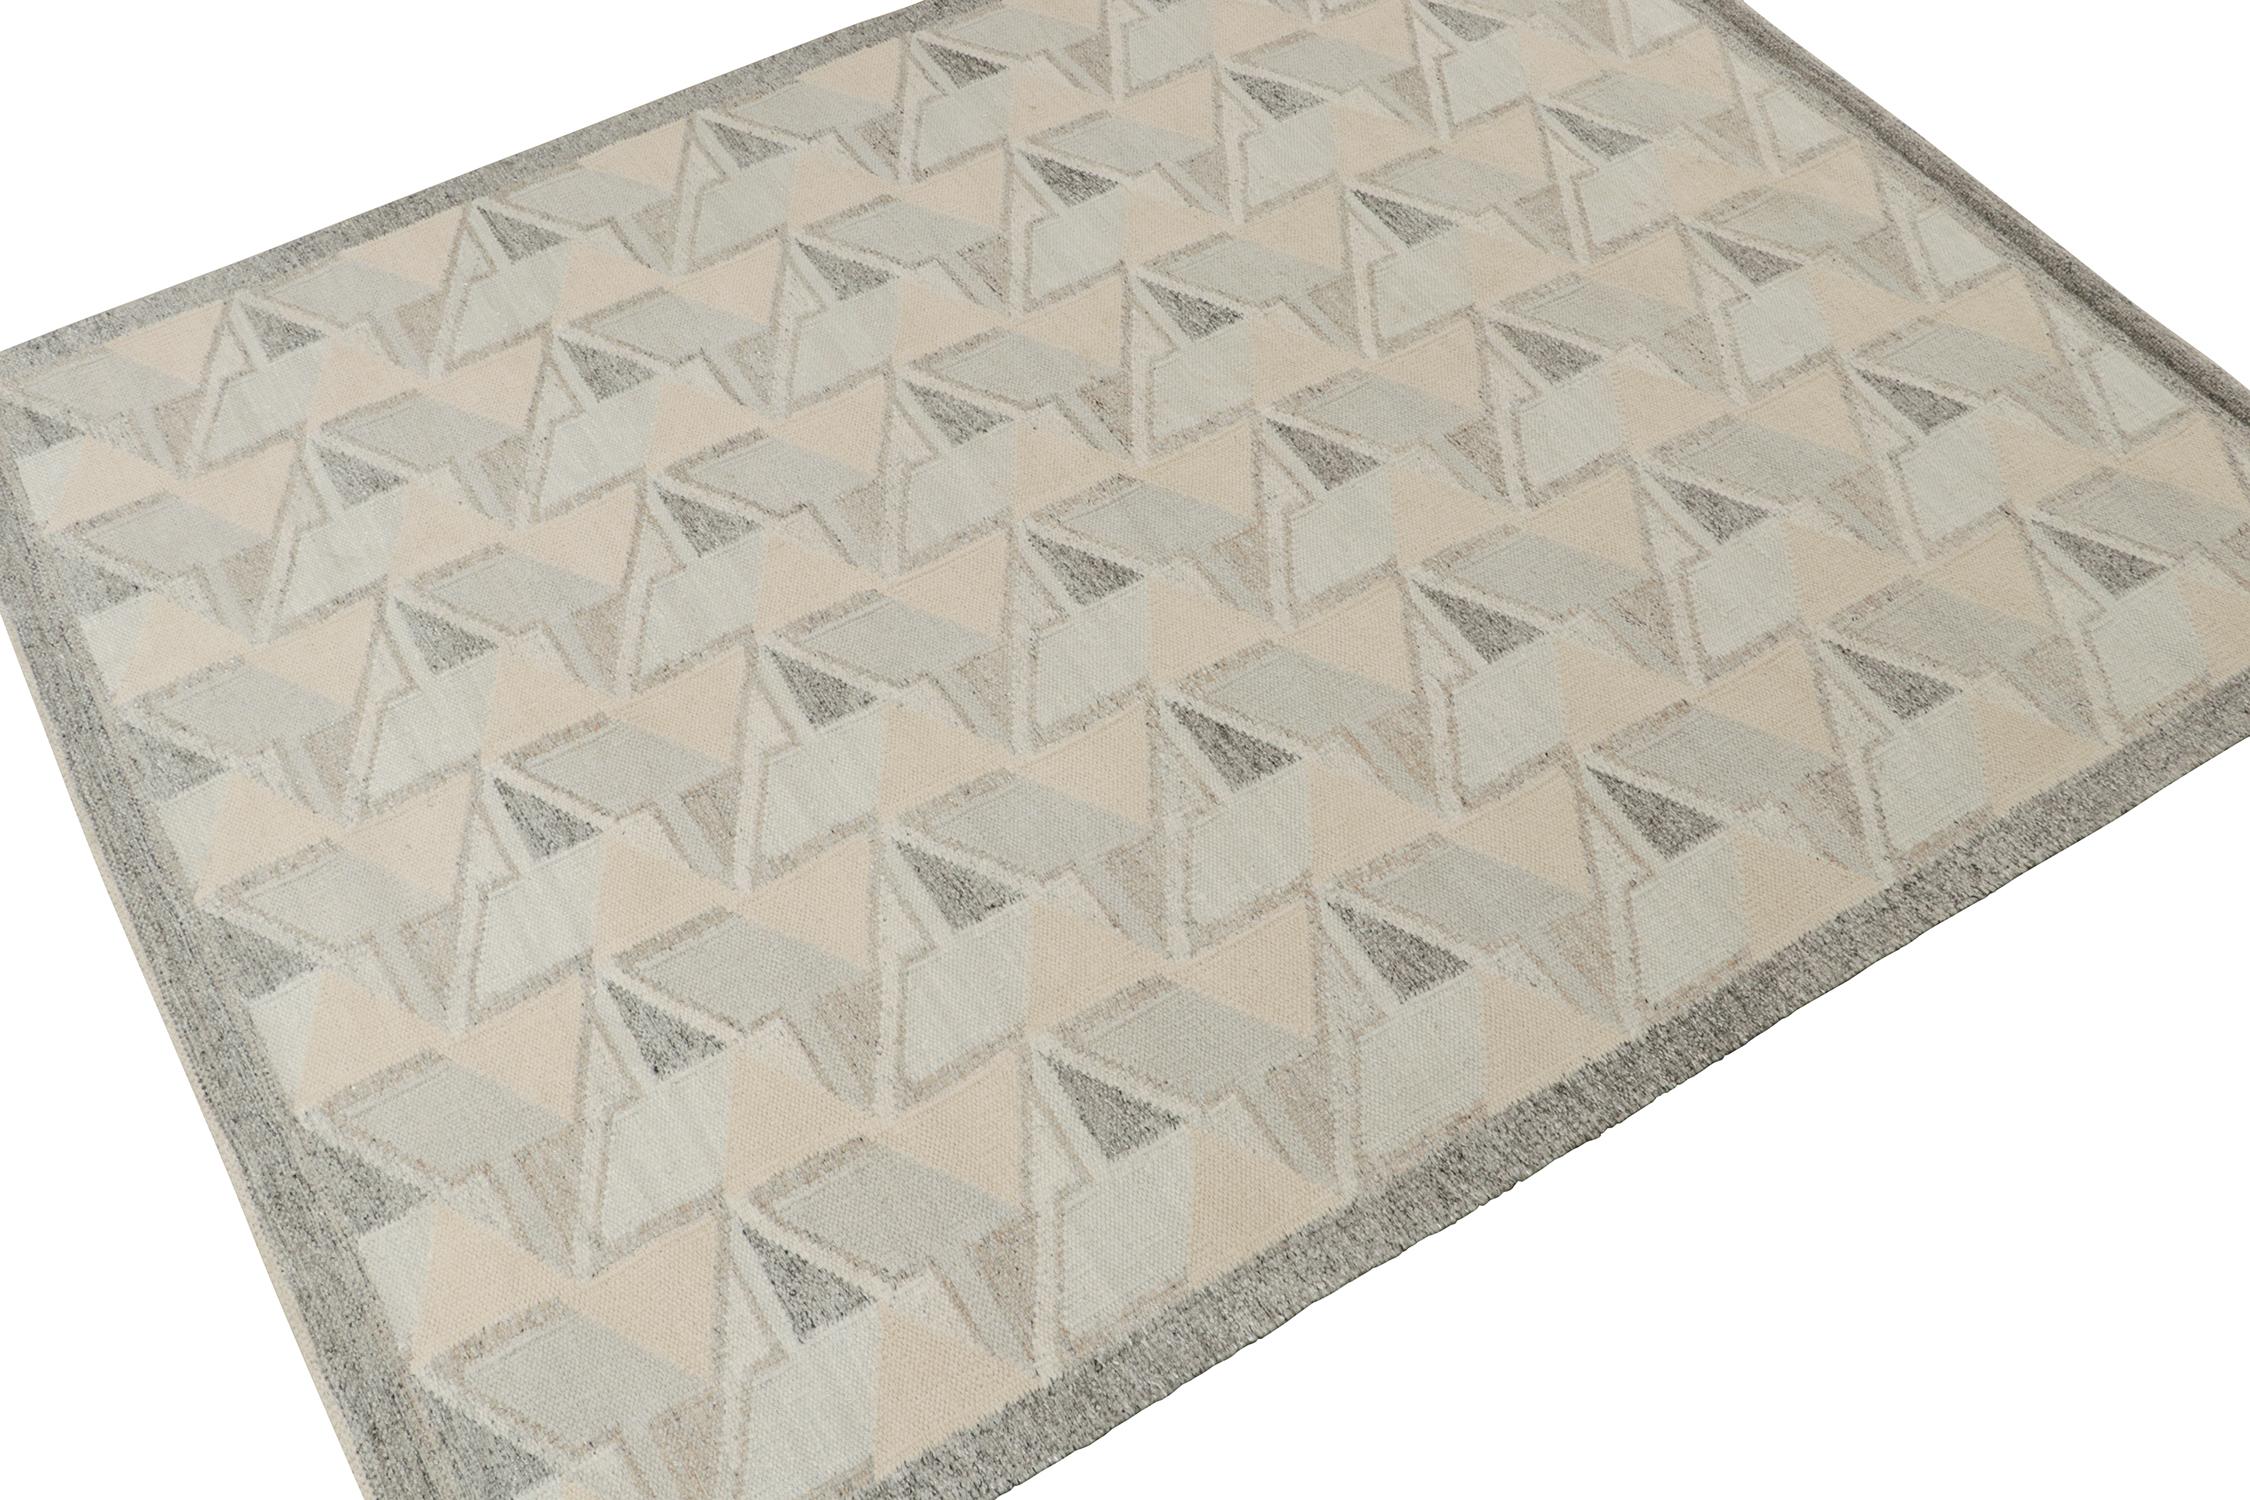 This smart 8 x 10 Swedish style kilim is the next addition to Rug & Kilim's award-winning Scandinavian flat weave collection. Handwoven in wool. 
Further On the Design: 
This rug enjoys geometric patterns in crisp beige and gray, with creamy